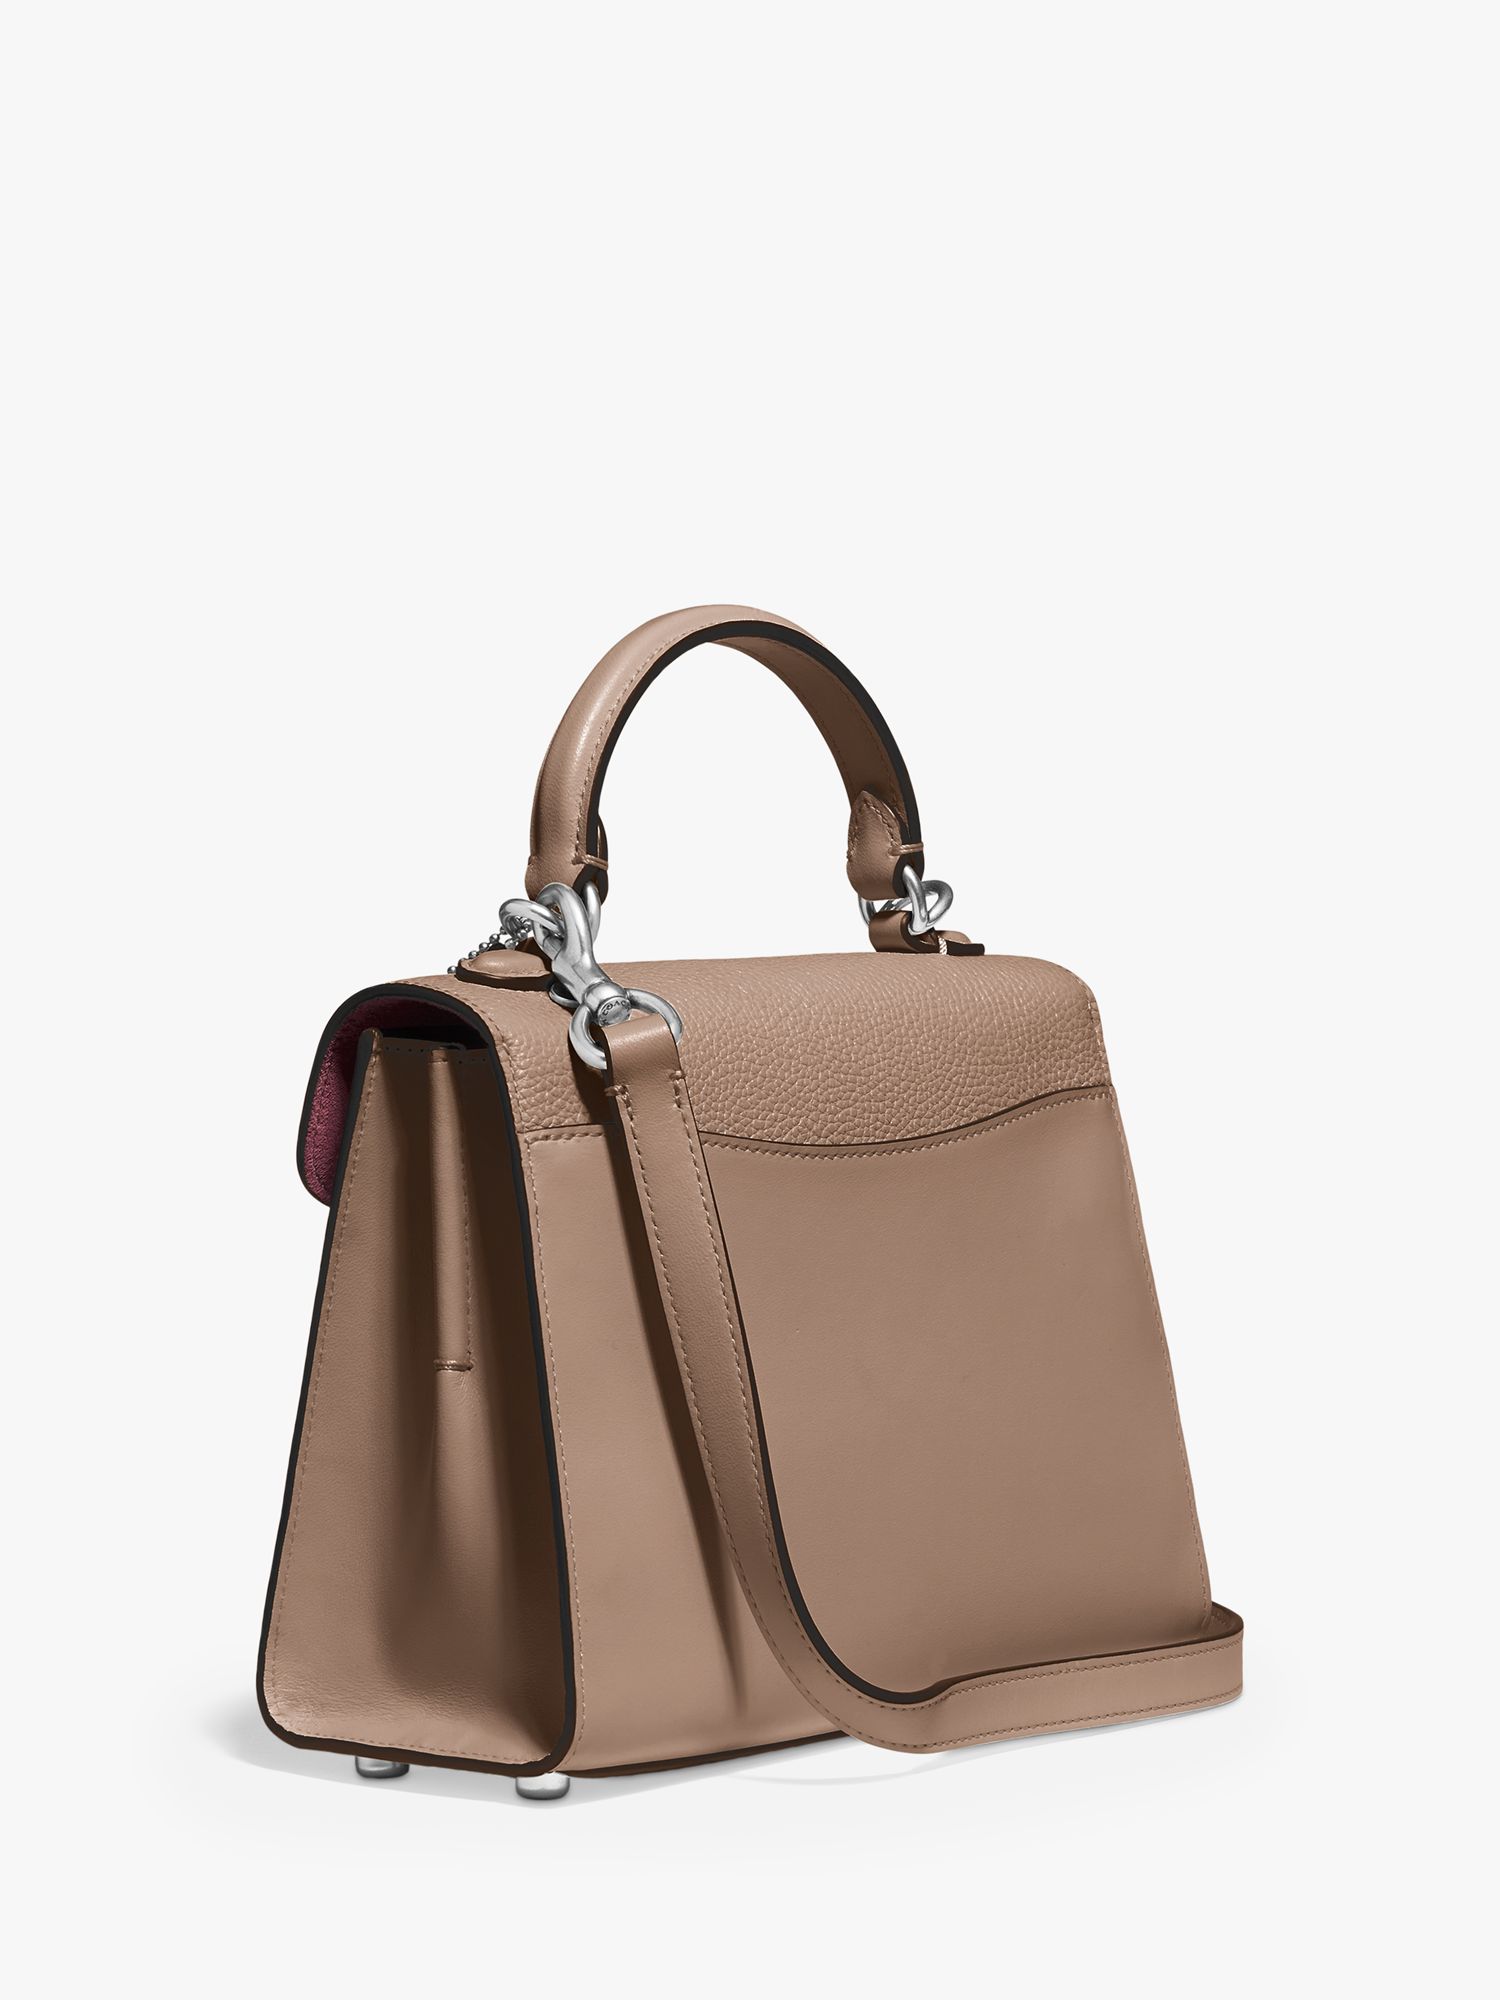 Coach Tabby 20 Leather Cross Body Bag, Taupe at John Lewis & Partners